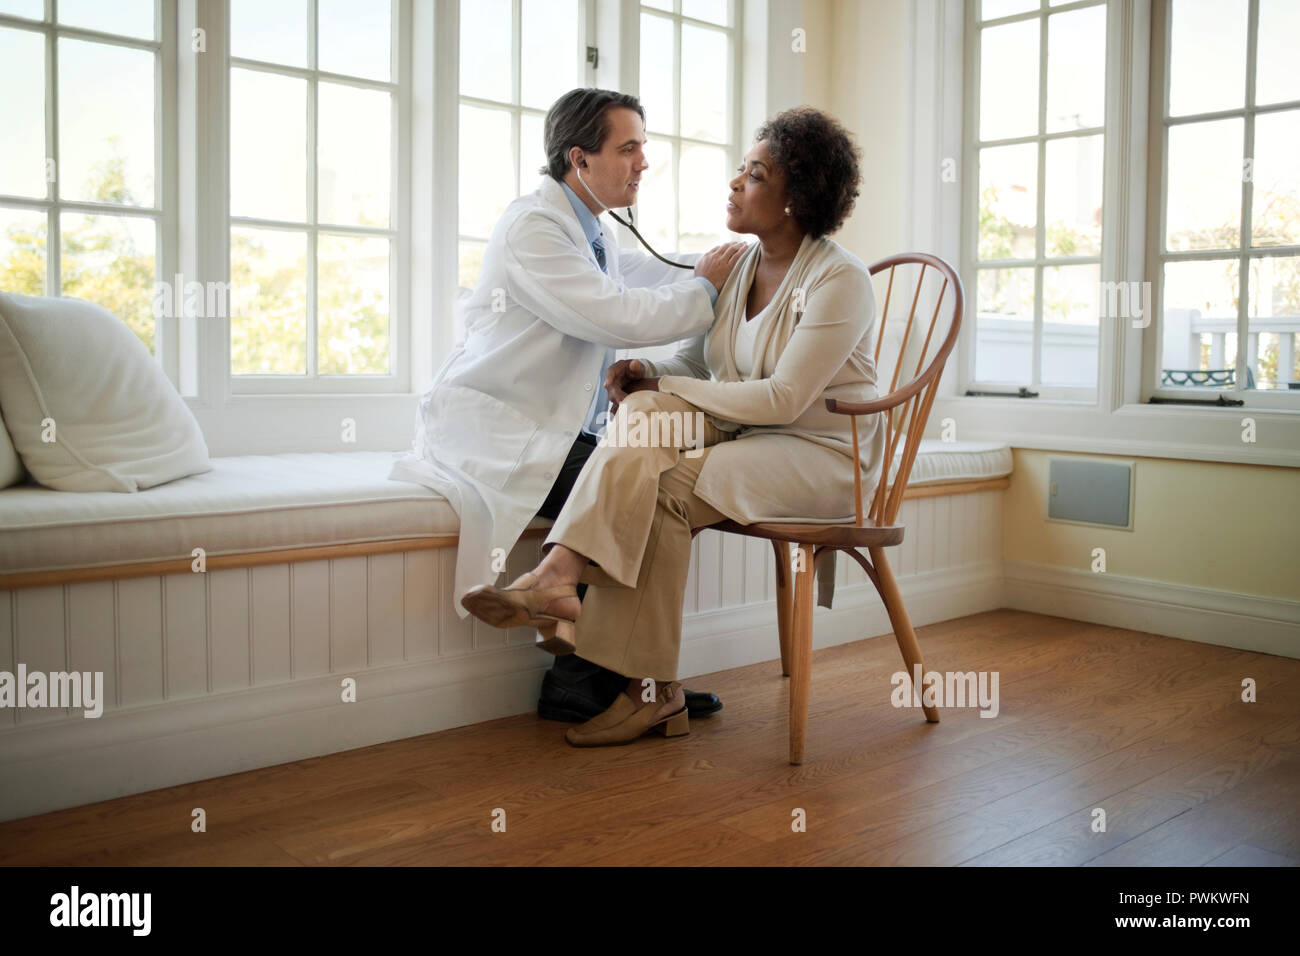 Middle aged doctor listening to a mature patient's heartbeat with a stethoscope. Stock Photo